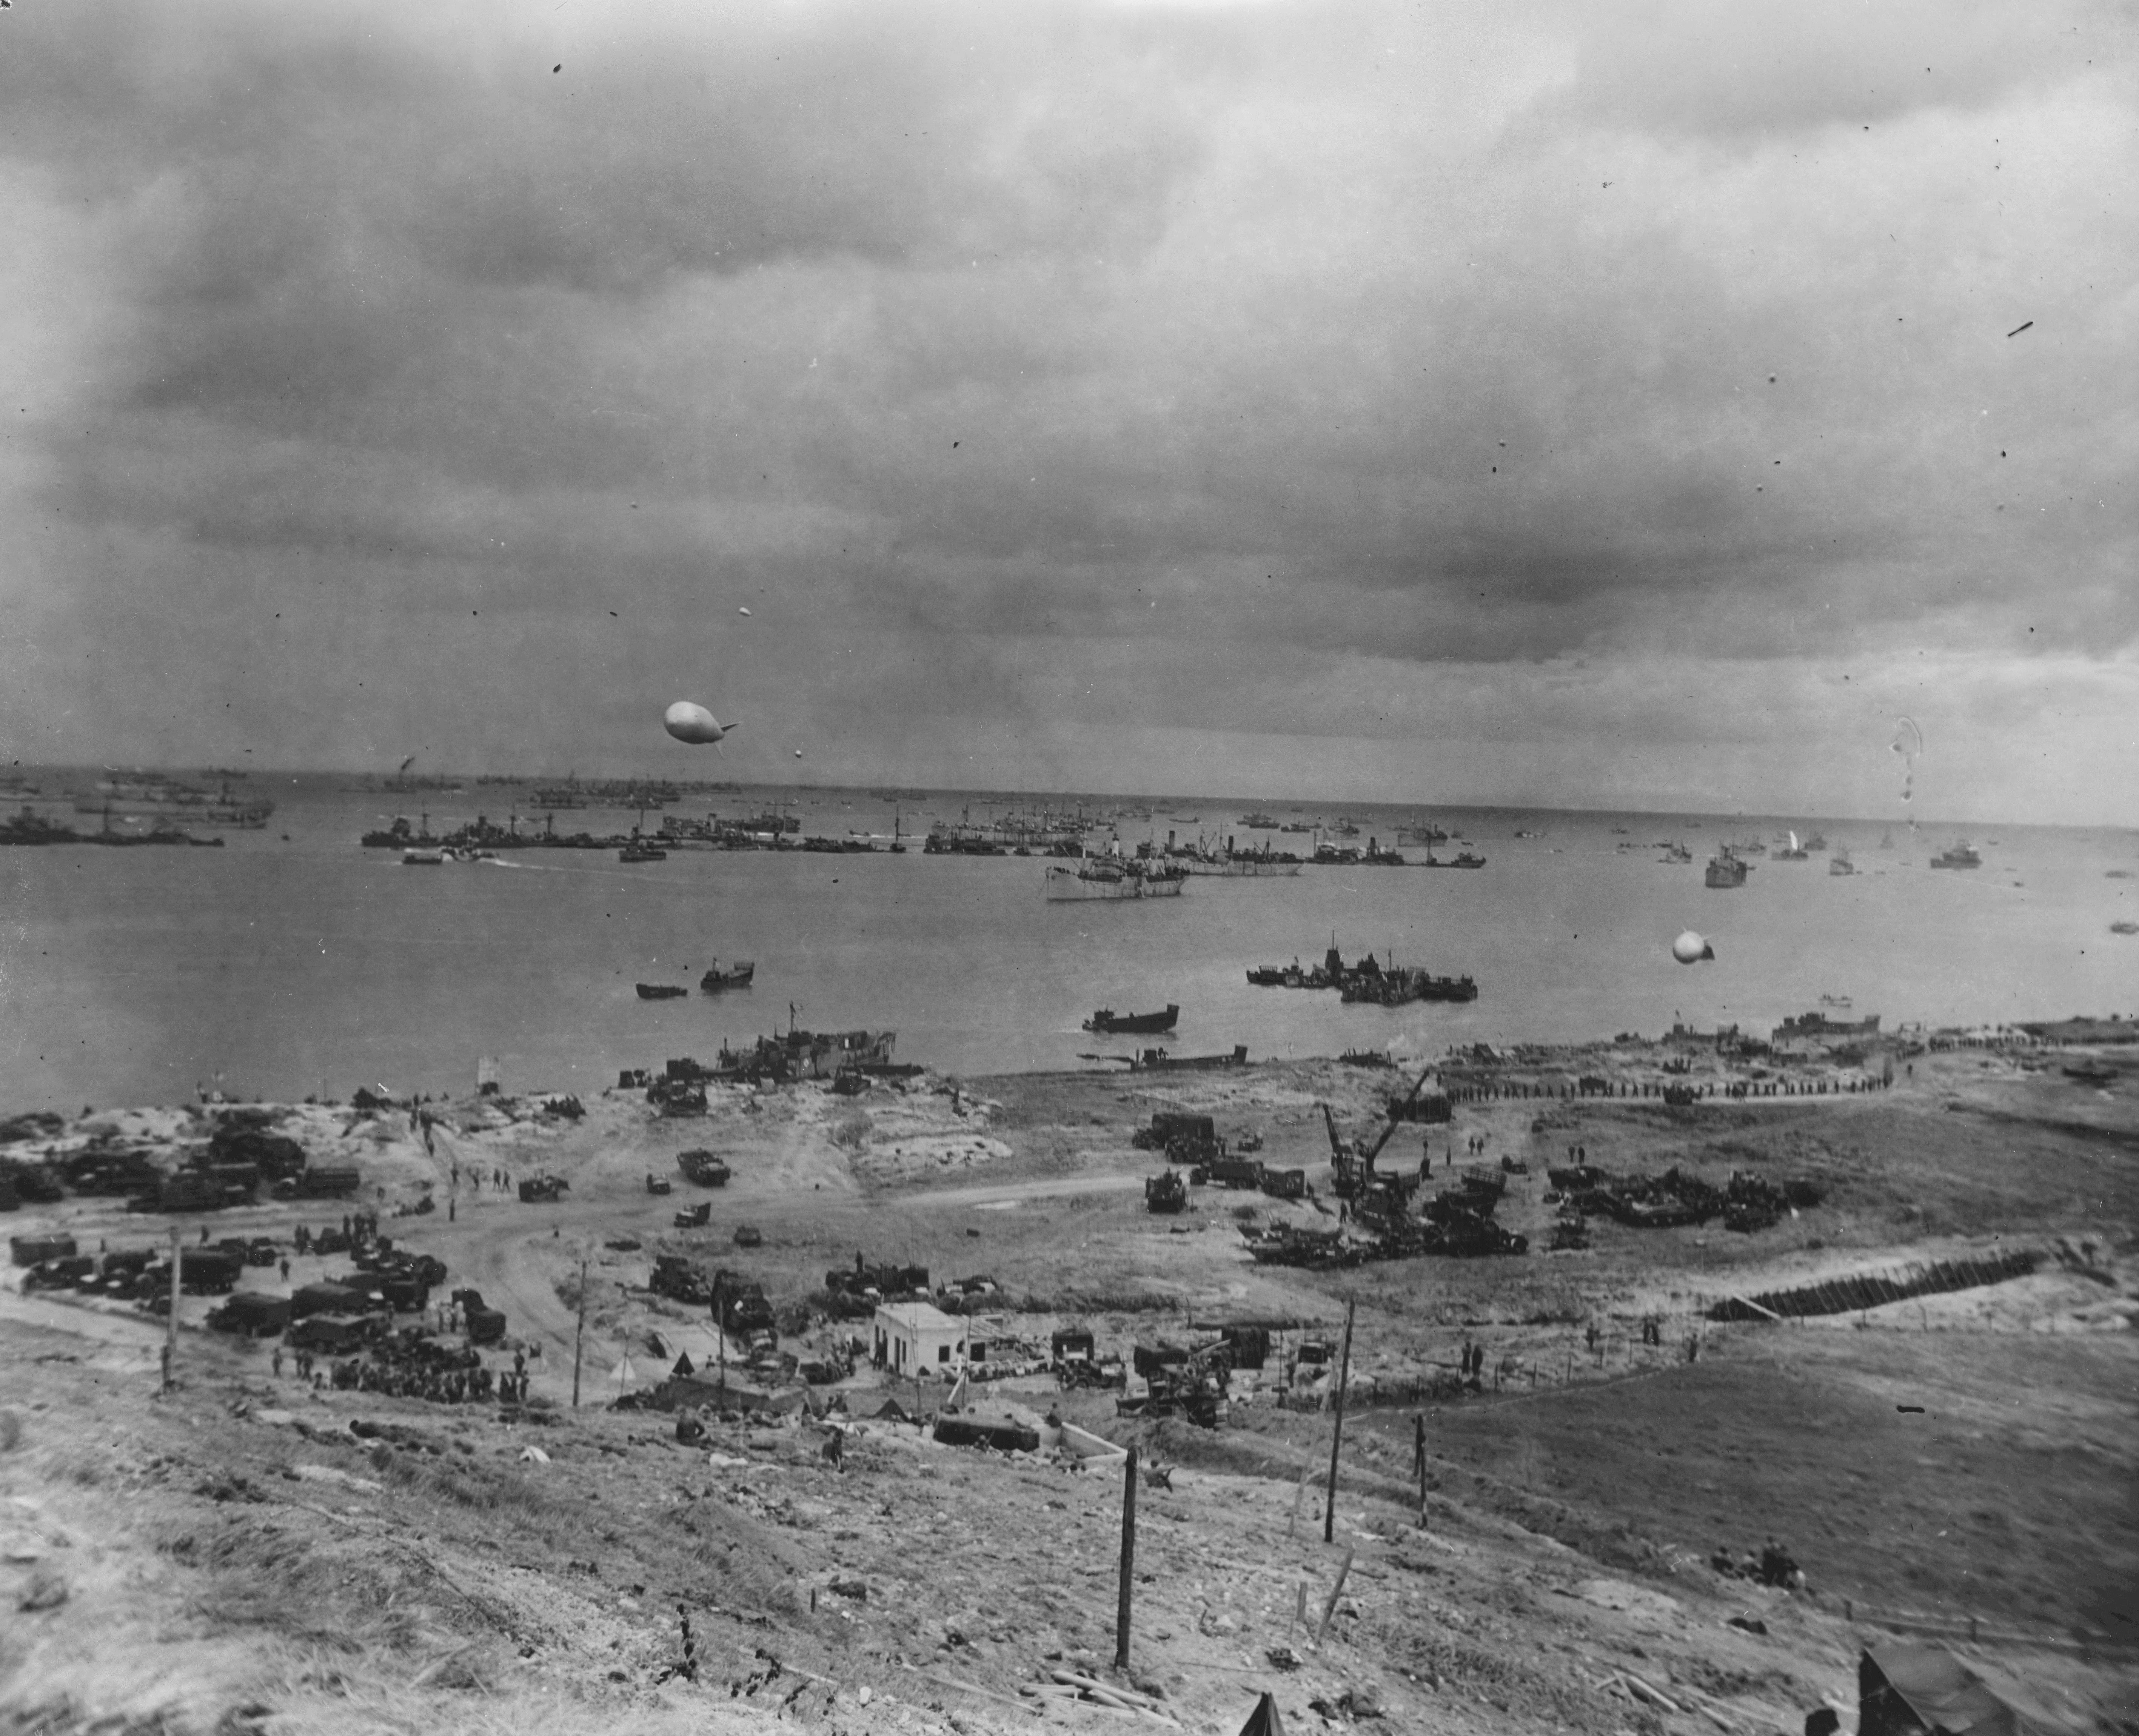 The 'Gooseberry' line of the 'Mulberry' artificial harbor off Omaha Beach, Normandy, France, Jun 1944